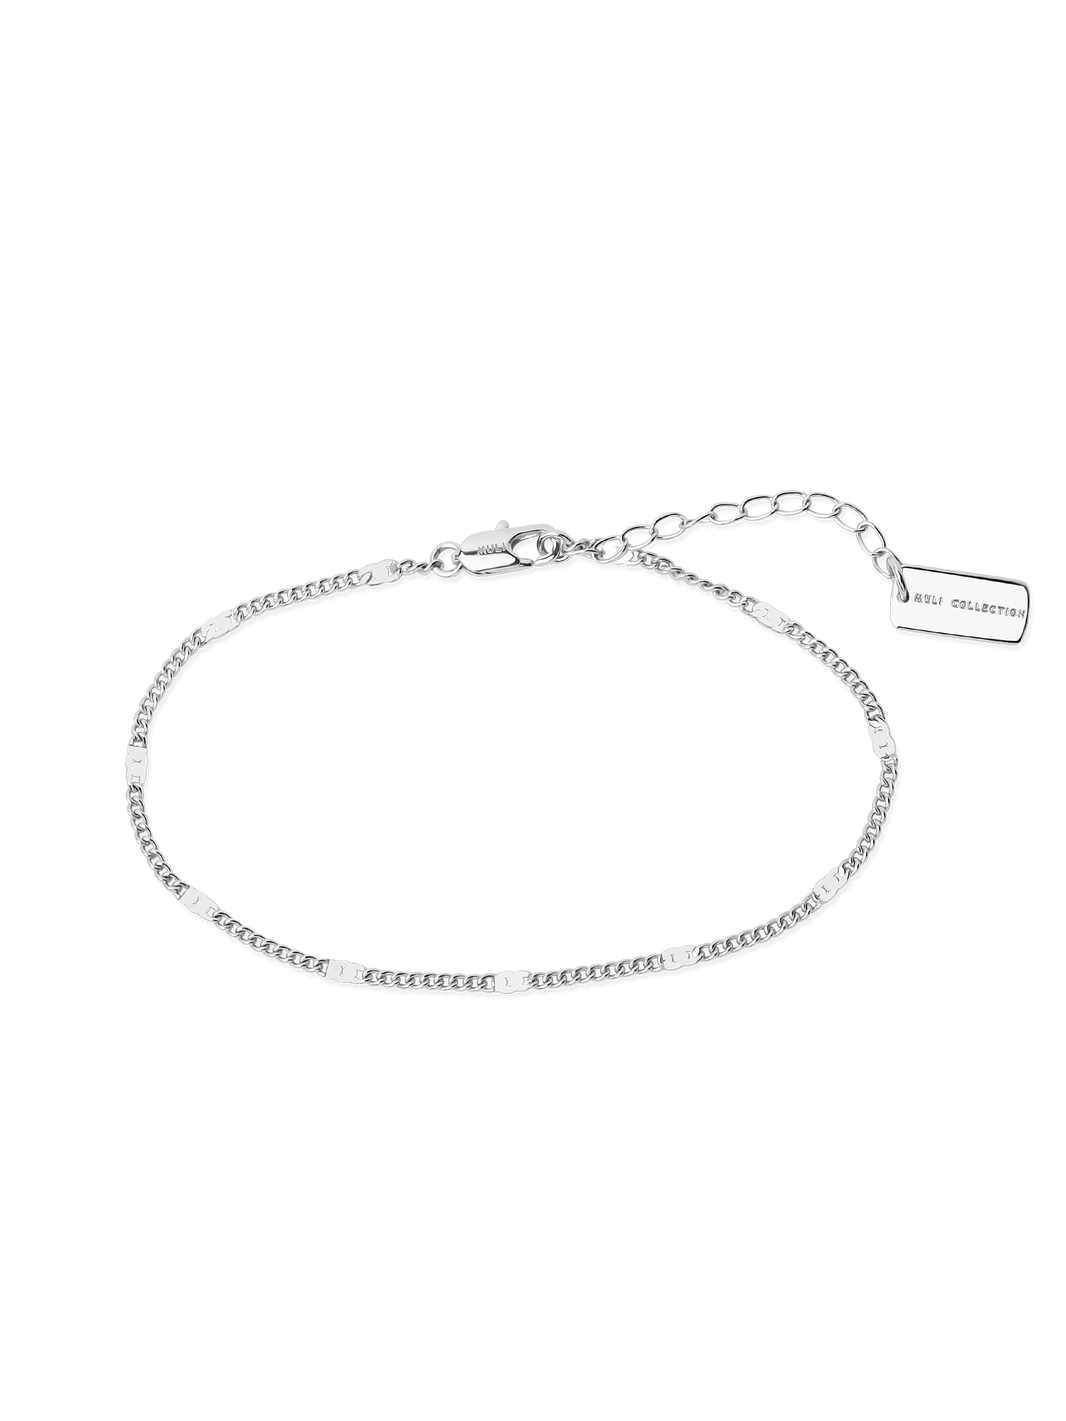 Beaded Curb Chain Bracelet Anklet Silver